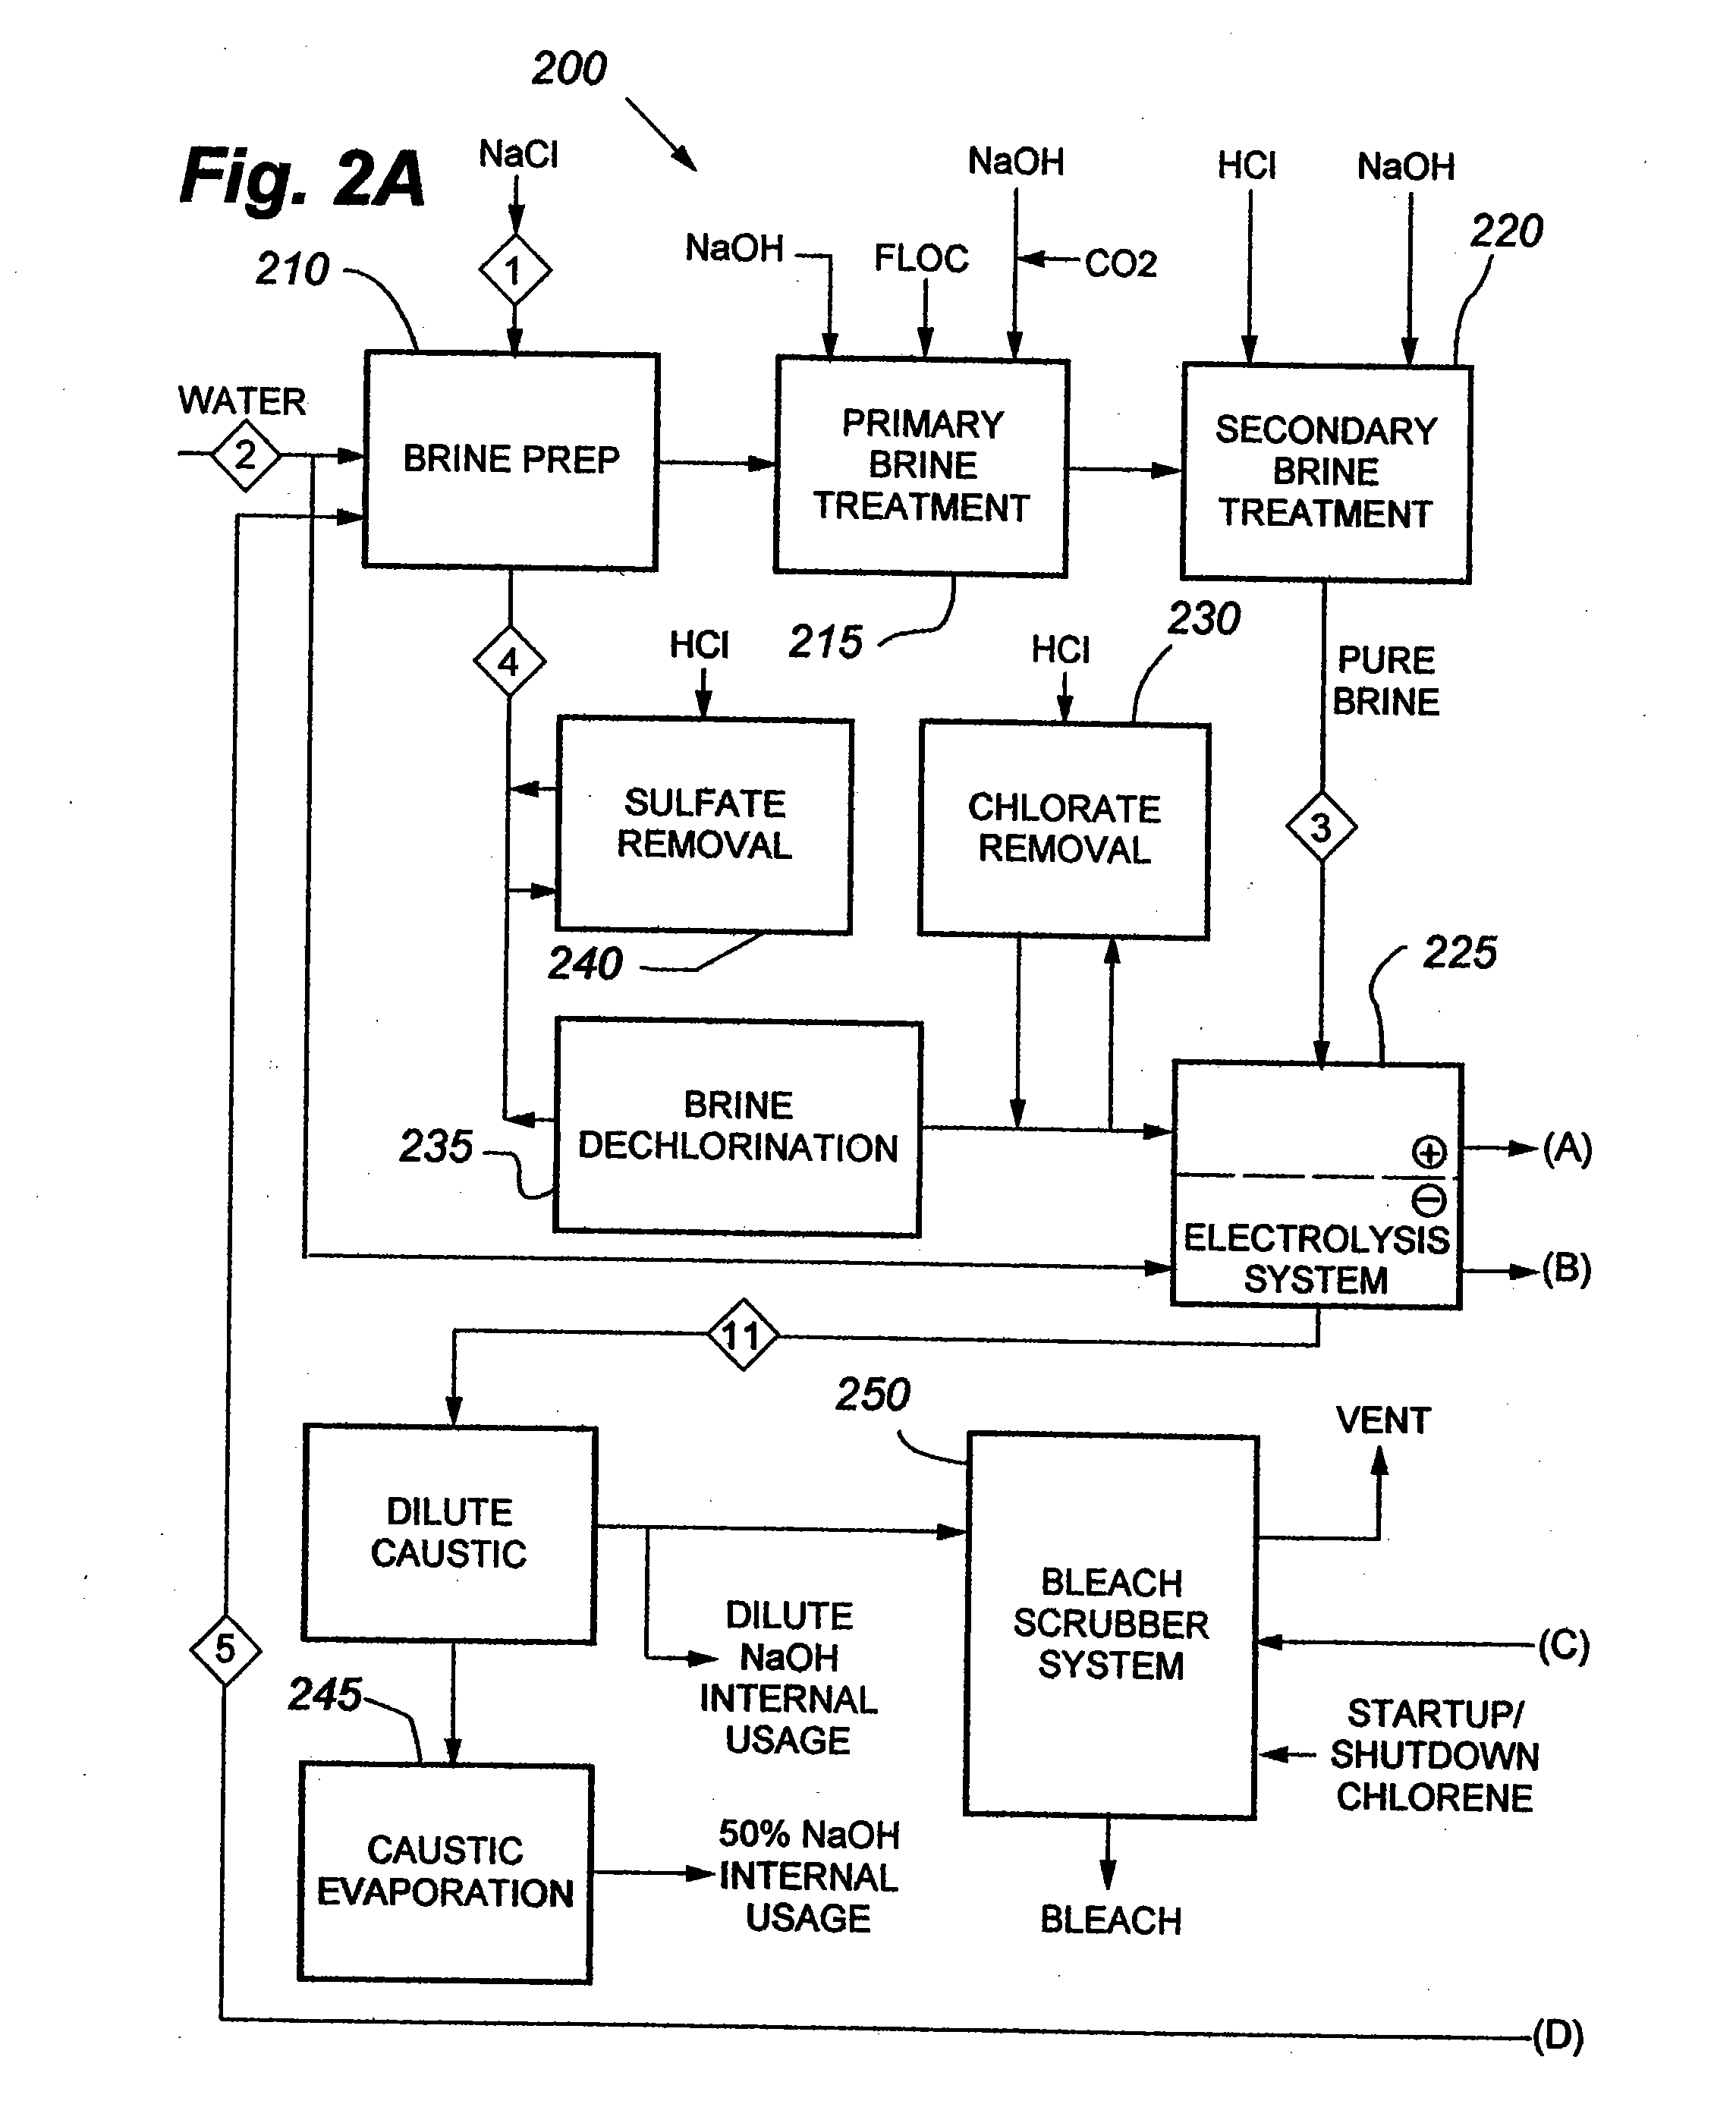 Systems and methods for supplying chlorine to and recovering chlorine from a polysilicon plant